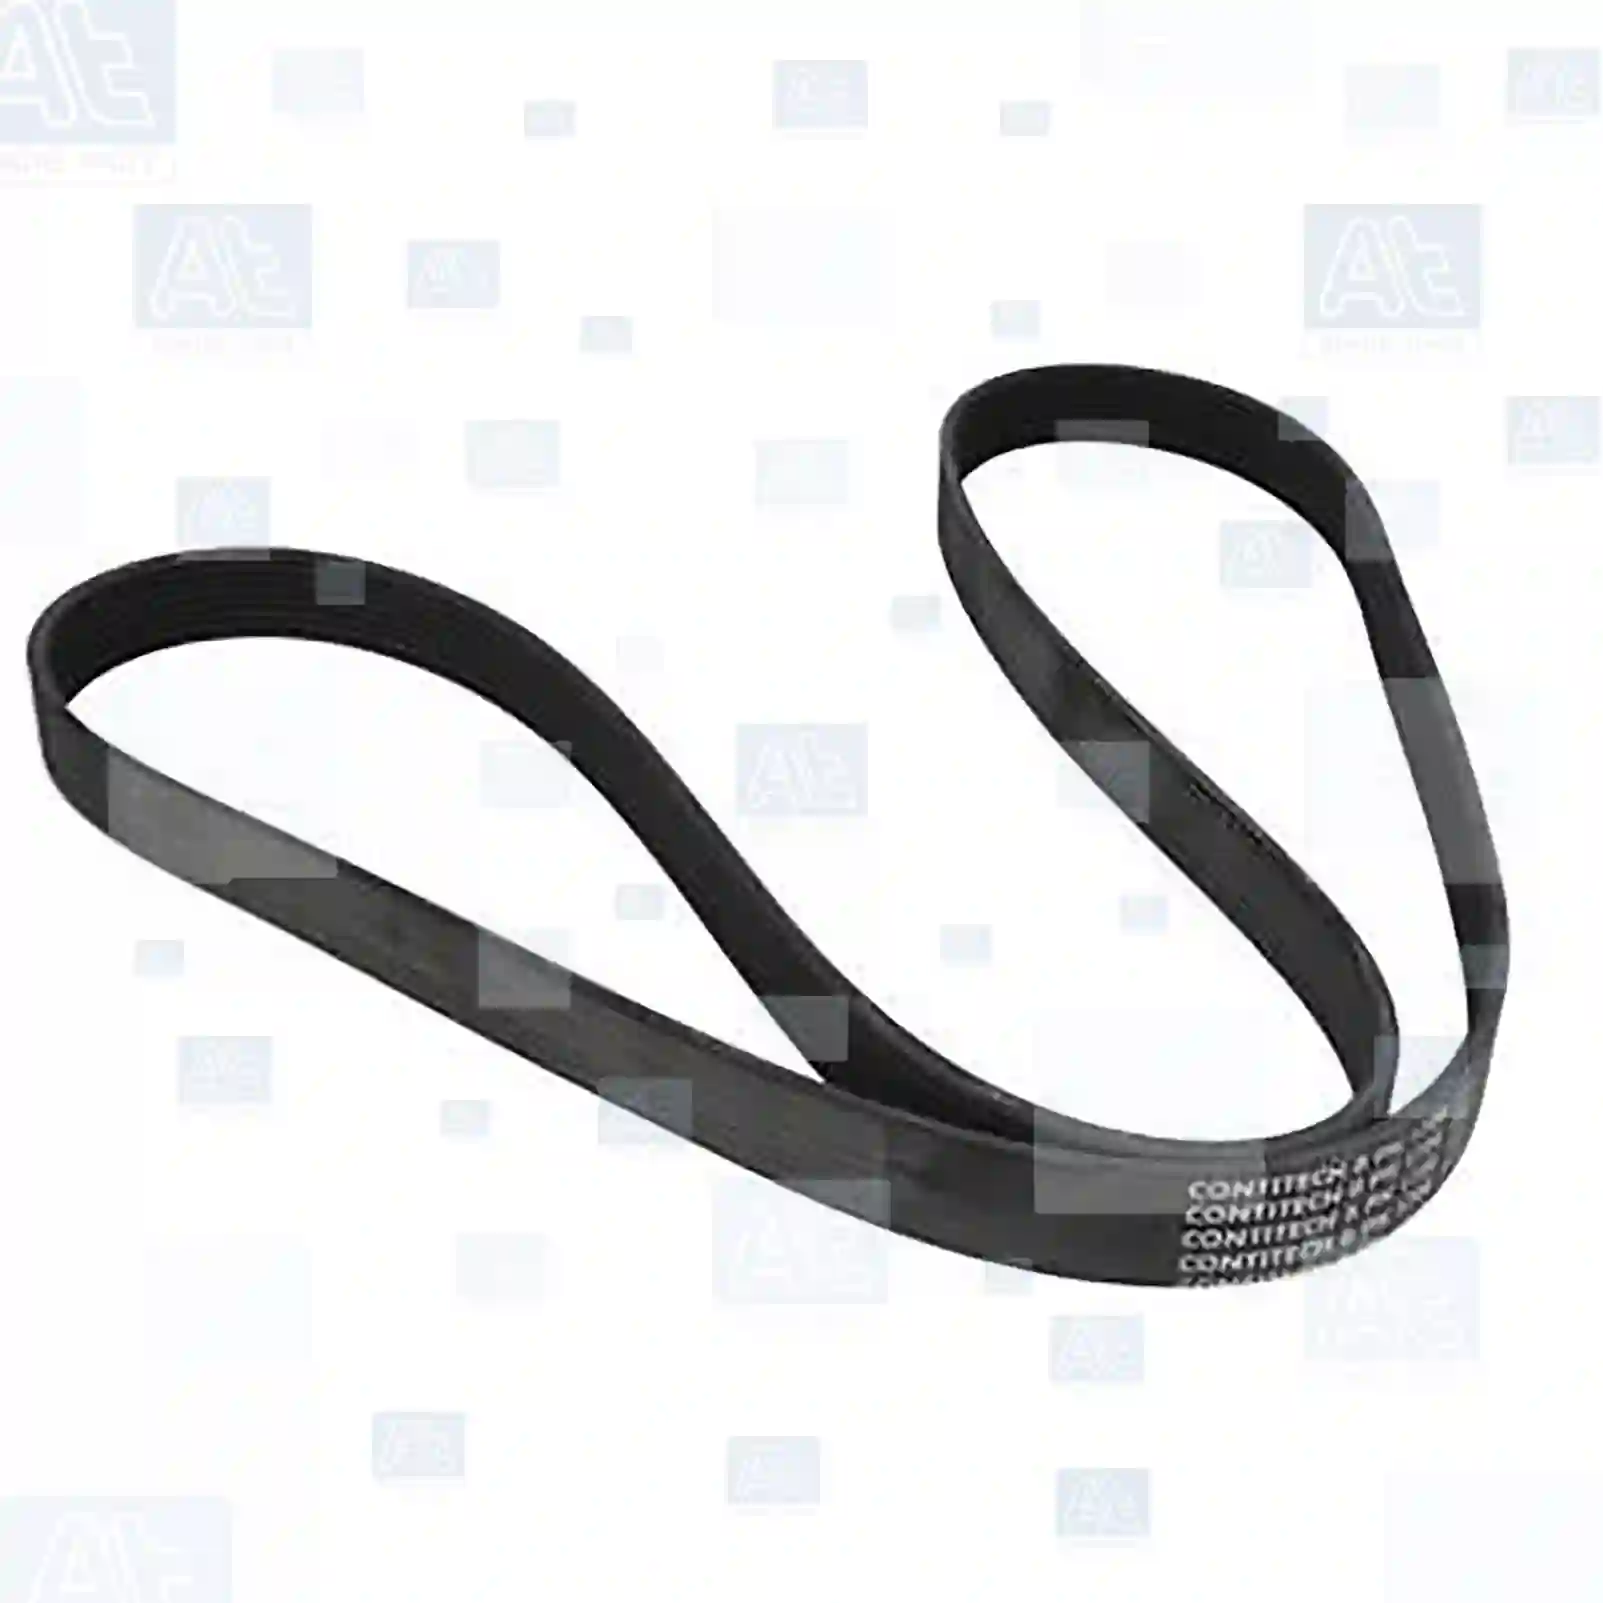 Multiribbed belt, at no 77708443, oem no: 55566903, 55566904, 55566905, 4861722AA, 4861722AB, 4861733AA, 4861733AB, 4861733AC, K04861722AA, K04861722AB, K04861733AA, K04861733AB, 5750YX, 9681752380, 4861722AA, 4861722AB, 4861733AC, 158102, 55202378, 71744462, 71746482, 1682006, 1683960, 6182613, 6198309, 1340600, 55566905, 6340678, 93192781, 97186395, 97385845, 25212-2B020, 8-97186395-0, 8-97385845-0, 25212-04050, 25212-2B020, 90916-02668, 1340008, 1340600, 6340671, 6340678, 5750YX, 9681752380, 5000678543, 5010412143, 90916-02667, 90916-02668, 9146117, 9146844, 9149117 At Spare Part | Engine, Accelerator Pedal, Camshaft, Connecting Rod, Crankcase, Crankshaft, Cylinder Head, Engine Suspension Mountings, Exhaust Manifold, Exhaust Gas Recirculation, Filter Kits, Flywheel Housing, General Overhaul Kits, Engine, Intake Manifold, Oil Cleaner, Oil Cooler, Oil Filter, Oil Pump, Oil Sump, Piston & Liner, Sensor & Switch, Timing Case, Turbocharger, Cooling System, Belt Tensioner, Coolant Filter, Coolant Pipe, Corrosion Prevention Agent, Drive, Expansion Tank, Fan, Intercooler, Monitors & Gauges, Radiator, Thermostat, V-Belt / Timing belt, Water Pump, Fuel System, Electronical Injector Unit, Feed Pump, Fuel Filter, cpl., Fuel Gauge Sender,  Fuel Line, Fuel Pump, Fuel Tank, Injection Line Kit, Injection Pump, Exhaust System, Clutch & Pedal, Gearbox, Propeller Shaft, Axles, Brake System, Hubs & Wheels, Suspension, Leaf Spring, Universal Parts / Accessories, Steering, Electrical System, Cabin Multiribbed belt, at no 77708443, oem no: 55566903, 55566904, 55566905, 4861722AA, 4861722AB, 4861733AA, 4861733AB, 4861733AC, K04861722AA, K04861722AB, K04861733AA, K04861733AB, 5750YX, 9681752380, 4861722AA, 4861722AB, 4861733AC, 158102, 55202378, 71744462, 71746482, 1682006, 1683960, 6182613, 6198309, 1340600, 55566905, 6340678, 93192781, 97186395, 97385845, 25212-2B020, 8-97186395-0, 8-97385845-0, 25212-04050, 25212-2B020, 90916-02668, 1340008, 1340600, 6340671, 6340678, 5750YX, 9681752380, 5000678543, 5010412143, 90916-02667, 90916-02668, 9146117, 9146844, 9149117 At Spare Part | Engine, Accelerator Pedal, Camshaft, Connecting Rod, Crankcase, Crankshaft, Cylinder Head, Engine Suspension Mountings, Exhaust Manifold, Exhaust Gas Recirculation, Filter Kits, Flywheel Housing, General Overhaul Kits, Engine, Intake Manifold, Oil Cleaner, Oil Cooler, Oil Filter, Oil Pump, Oil Sump, Piston & Liner, Sensor & Switch, Timing Case, Turbocharger, Cooling System, Belt Tensioner, Coolant Filter, Coolant Pipe, Corrosion Prevention Agent, Drive, Expansion Tank, Fan, Intercooler, Monitors & Gauges, Radiator, Thermostat, V-Belt / Timing belt, Water Pump, Fuel System, Electronical Injector Unit, Feed Pump, Fuel Filter, cpl., Fuel Gauge Sender,  Fuel Line, Fuel Pump, Fuel Tank, Injection Line Kit, Injection Pump, Exhaust System, Clutch & Pedal, Gearbox, Propeller Shaft, Axles, Brake System, Hubs & Wheels, Suspension, Leaf Spring, Universal Parts / Accessories, Steering, Electrical System, Cabin